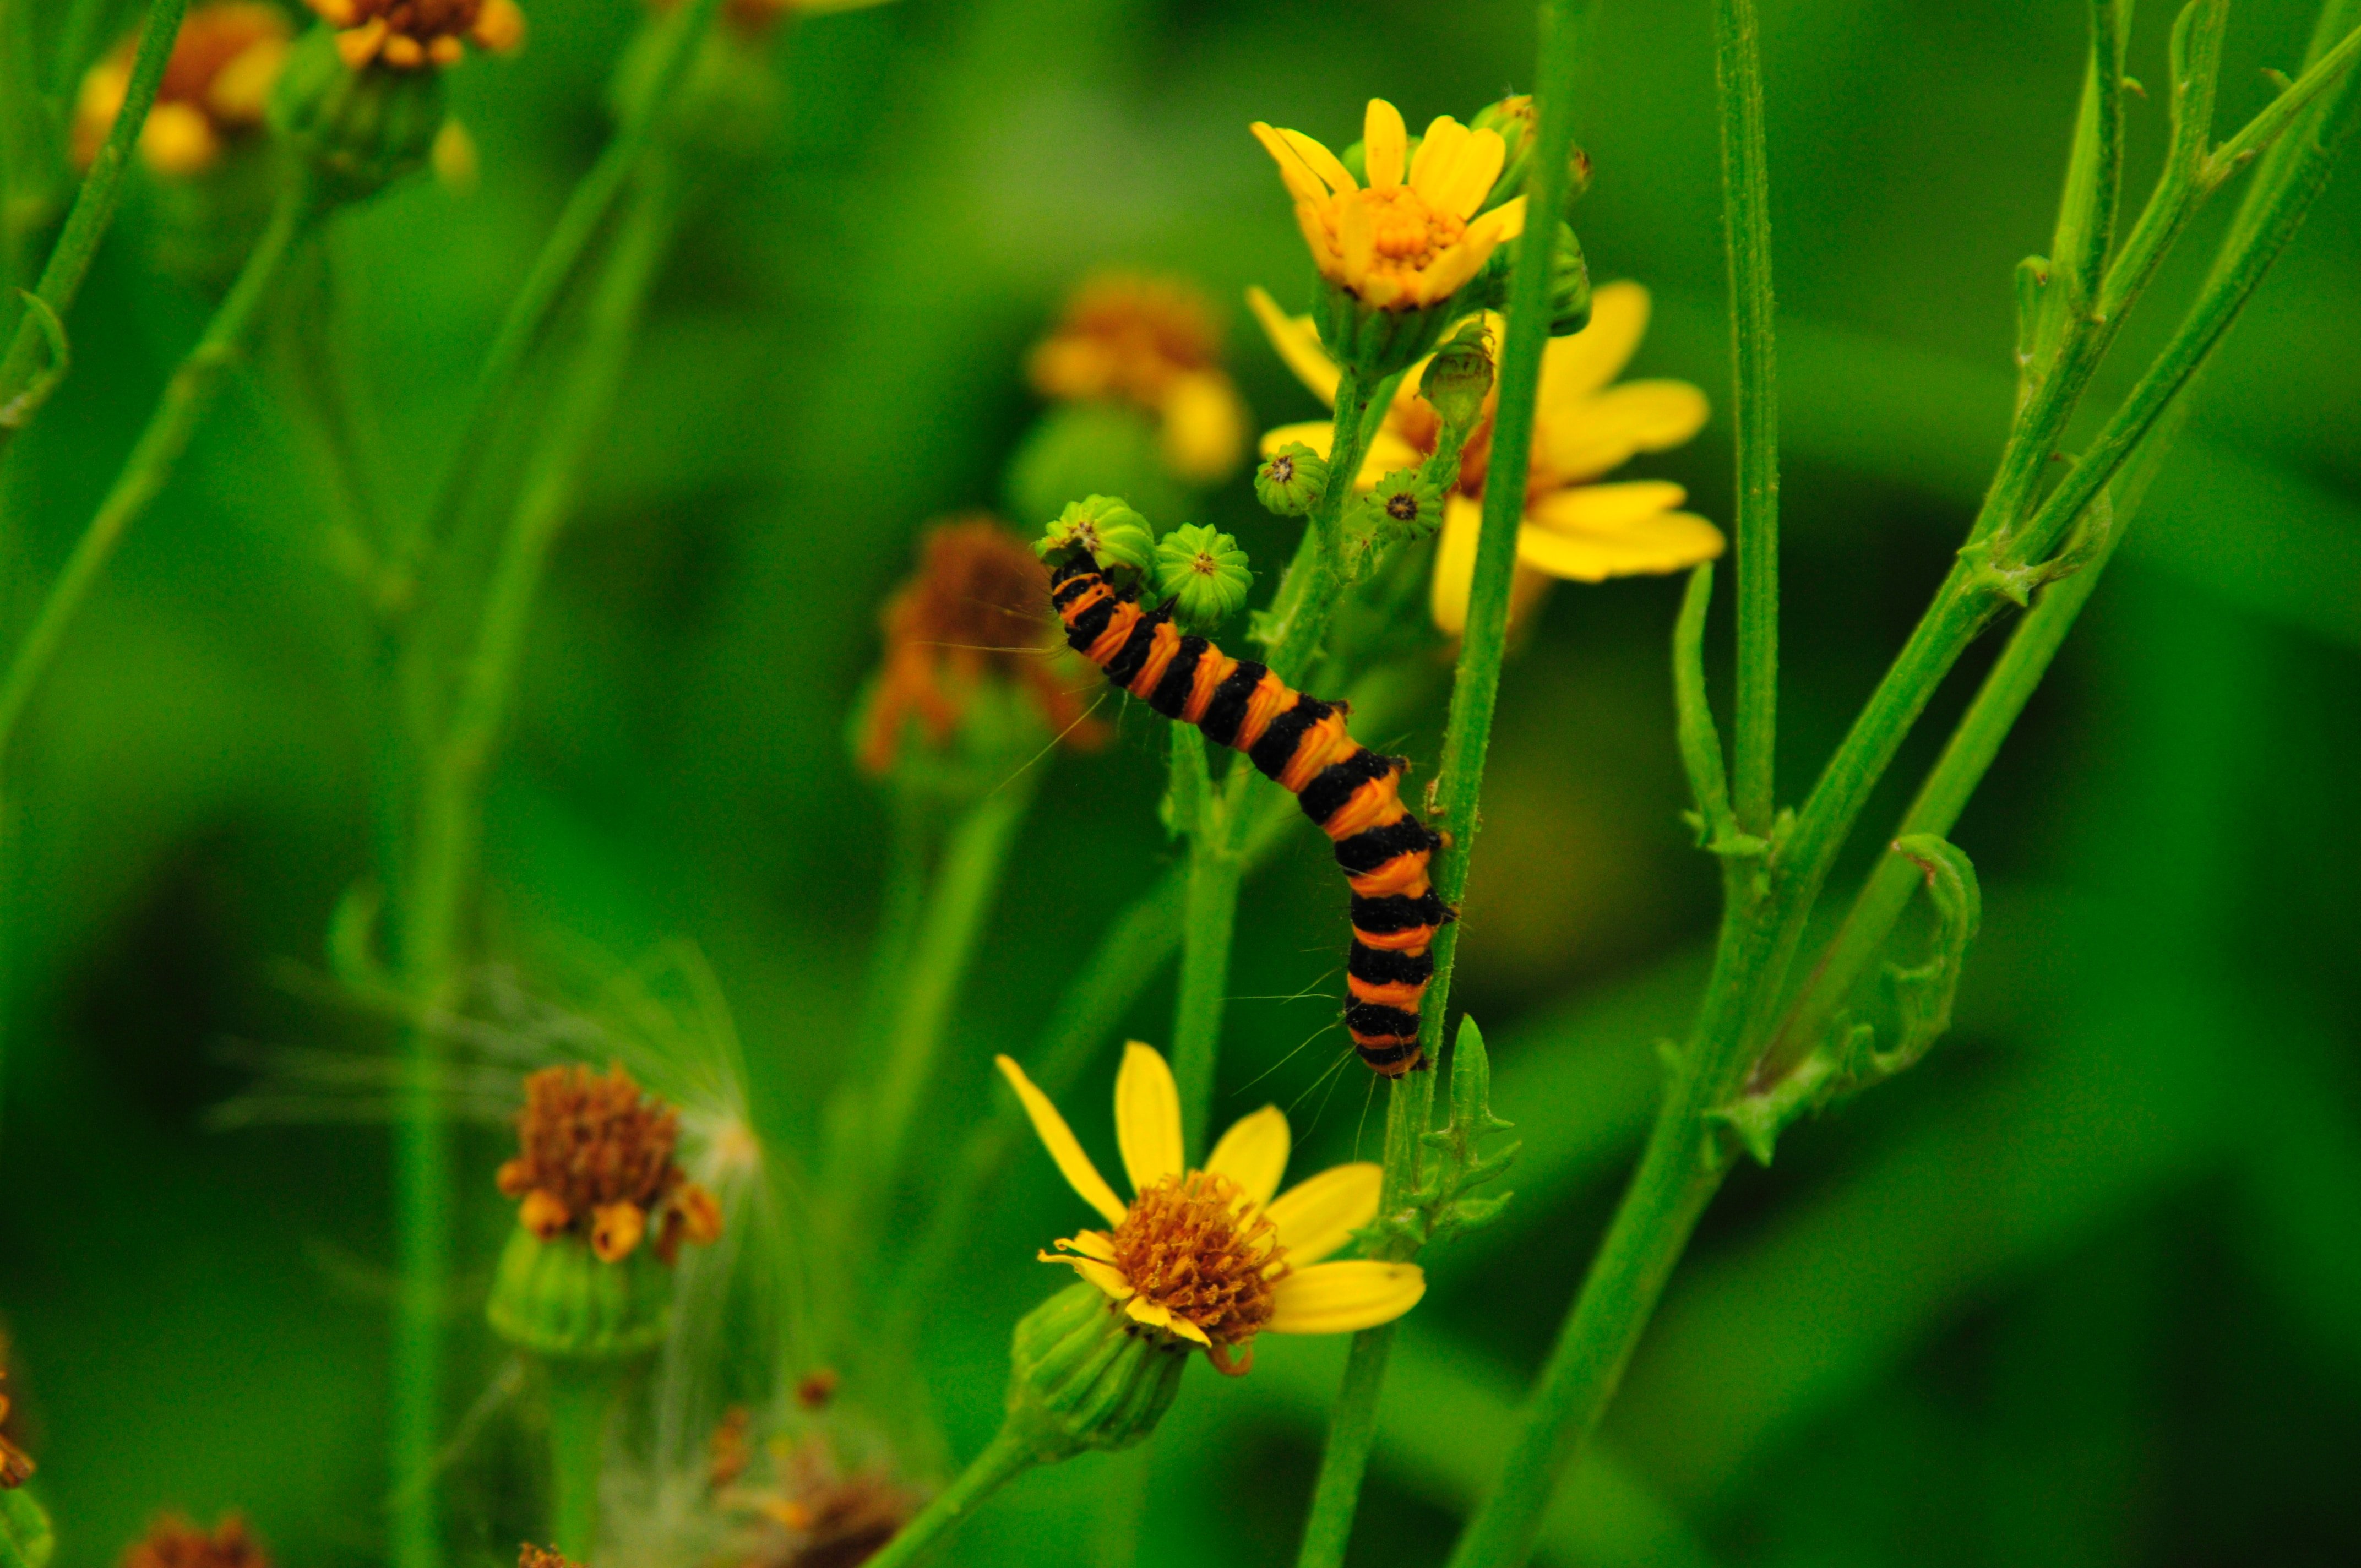 Caterpillar Picture. Download Free Image